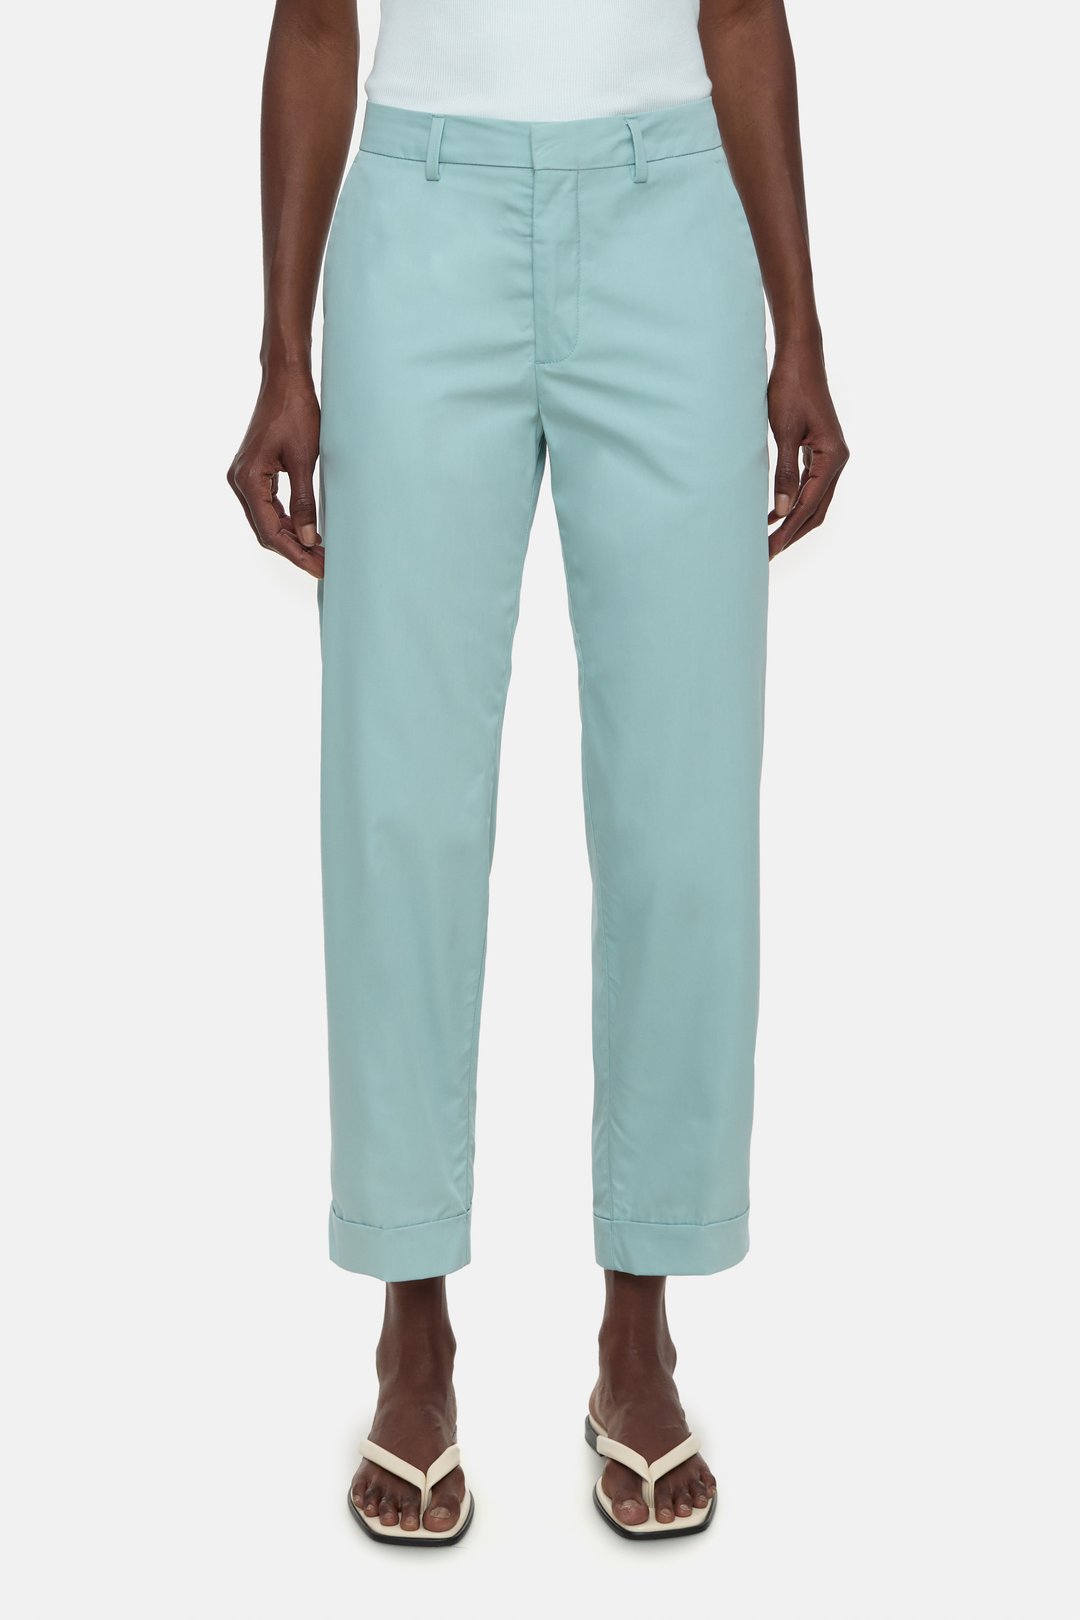 SLIM PANTS - STYLE NAME AUCKLEY | CLOSED